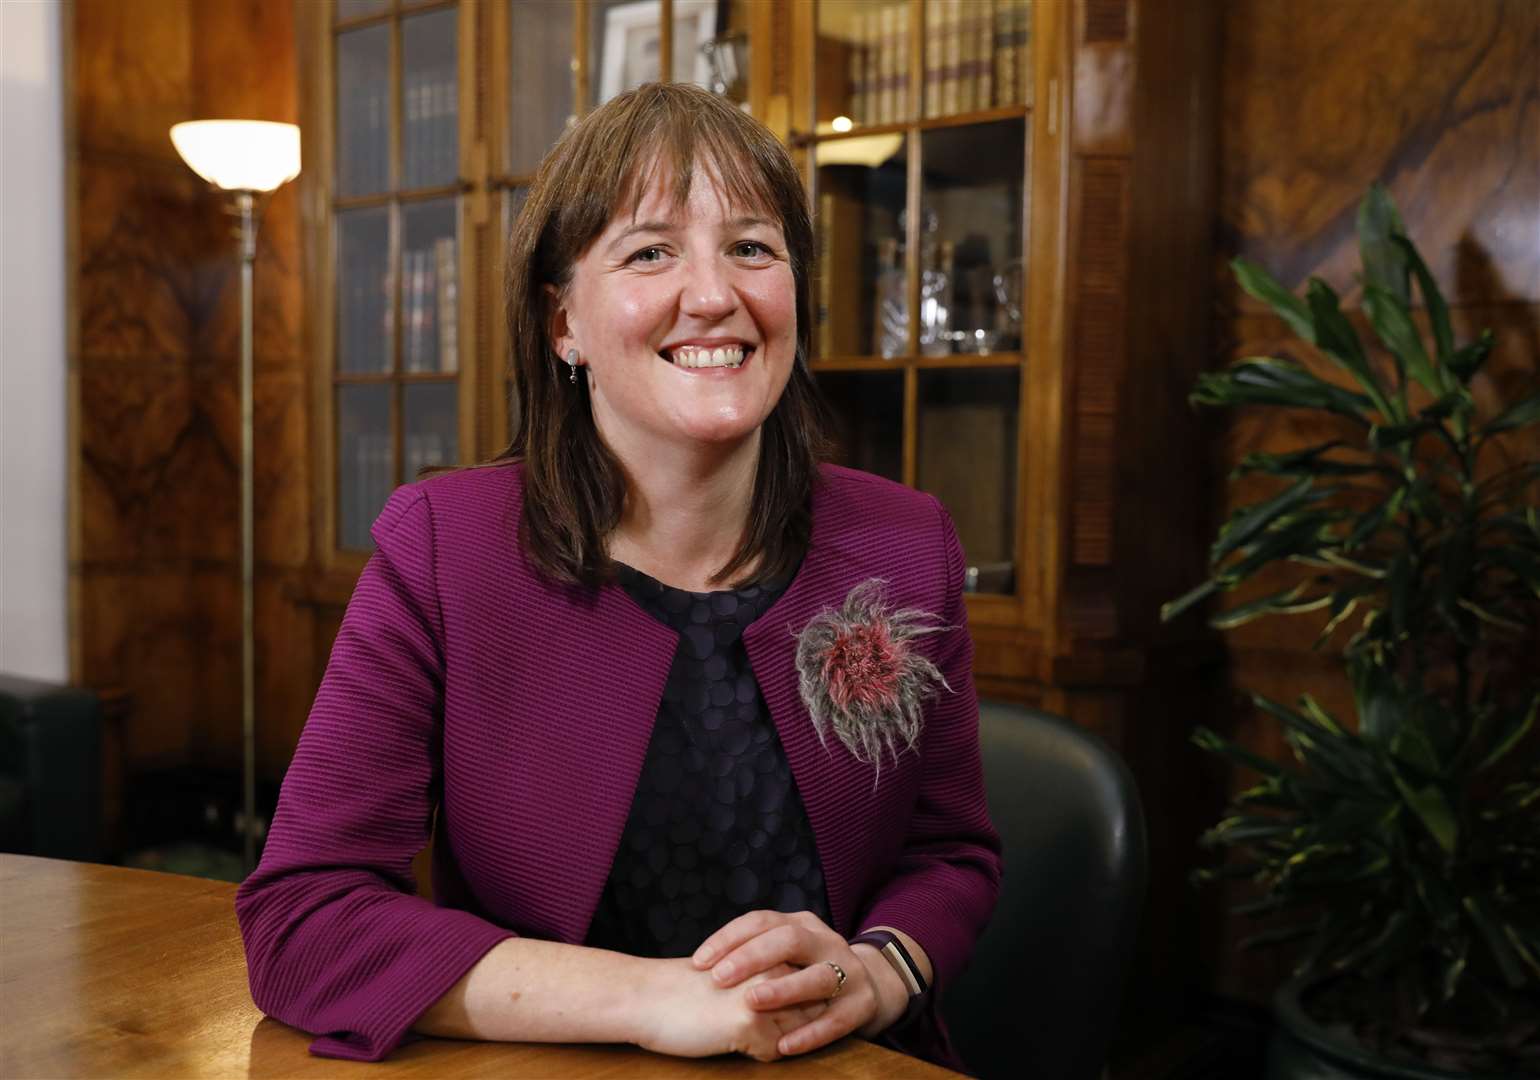 Maree Todd will be sworn in as constituency MSP for Caithness, Sutherland and Ross.